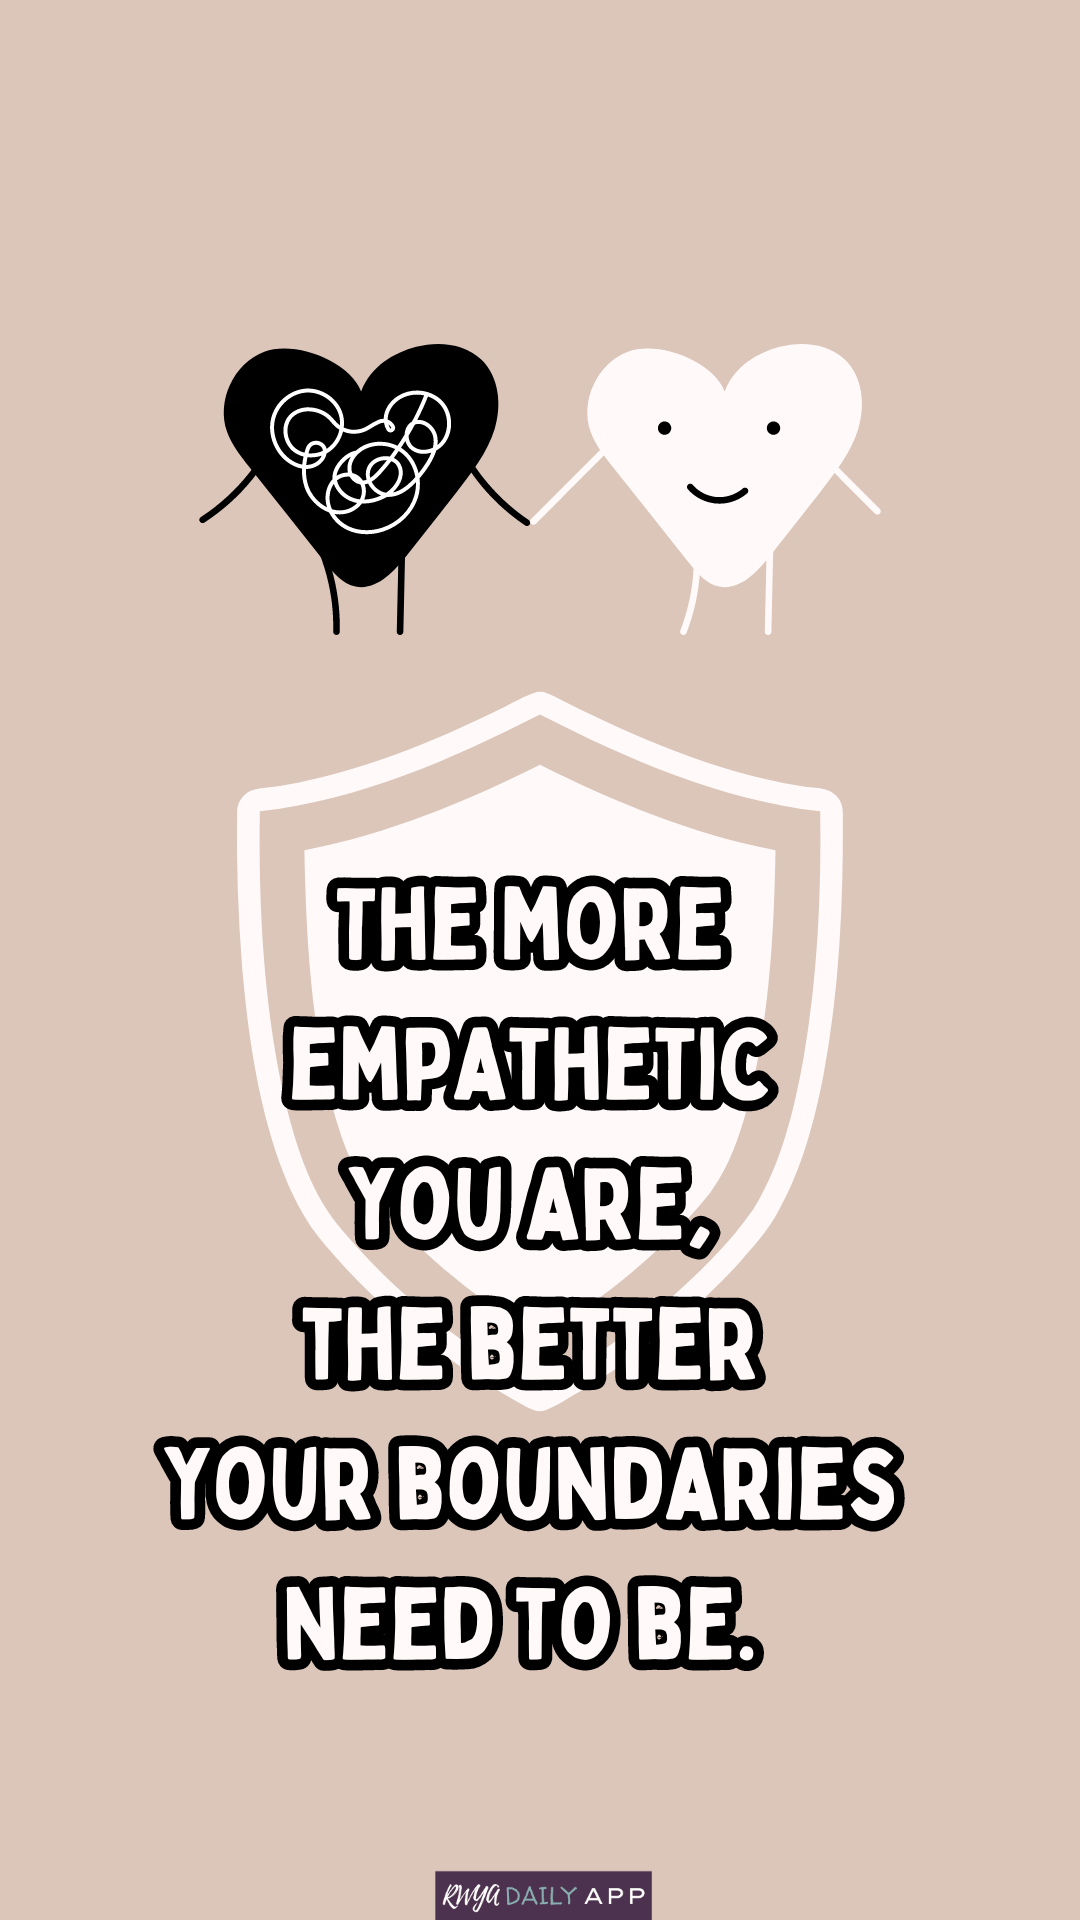 The more empathetic you are, the better your boundaries need to be.  